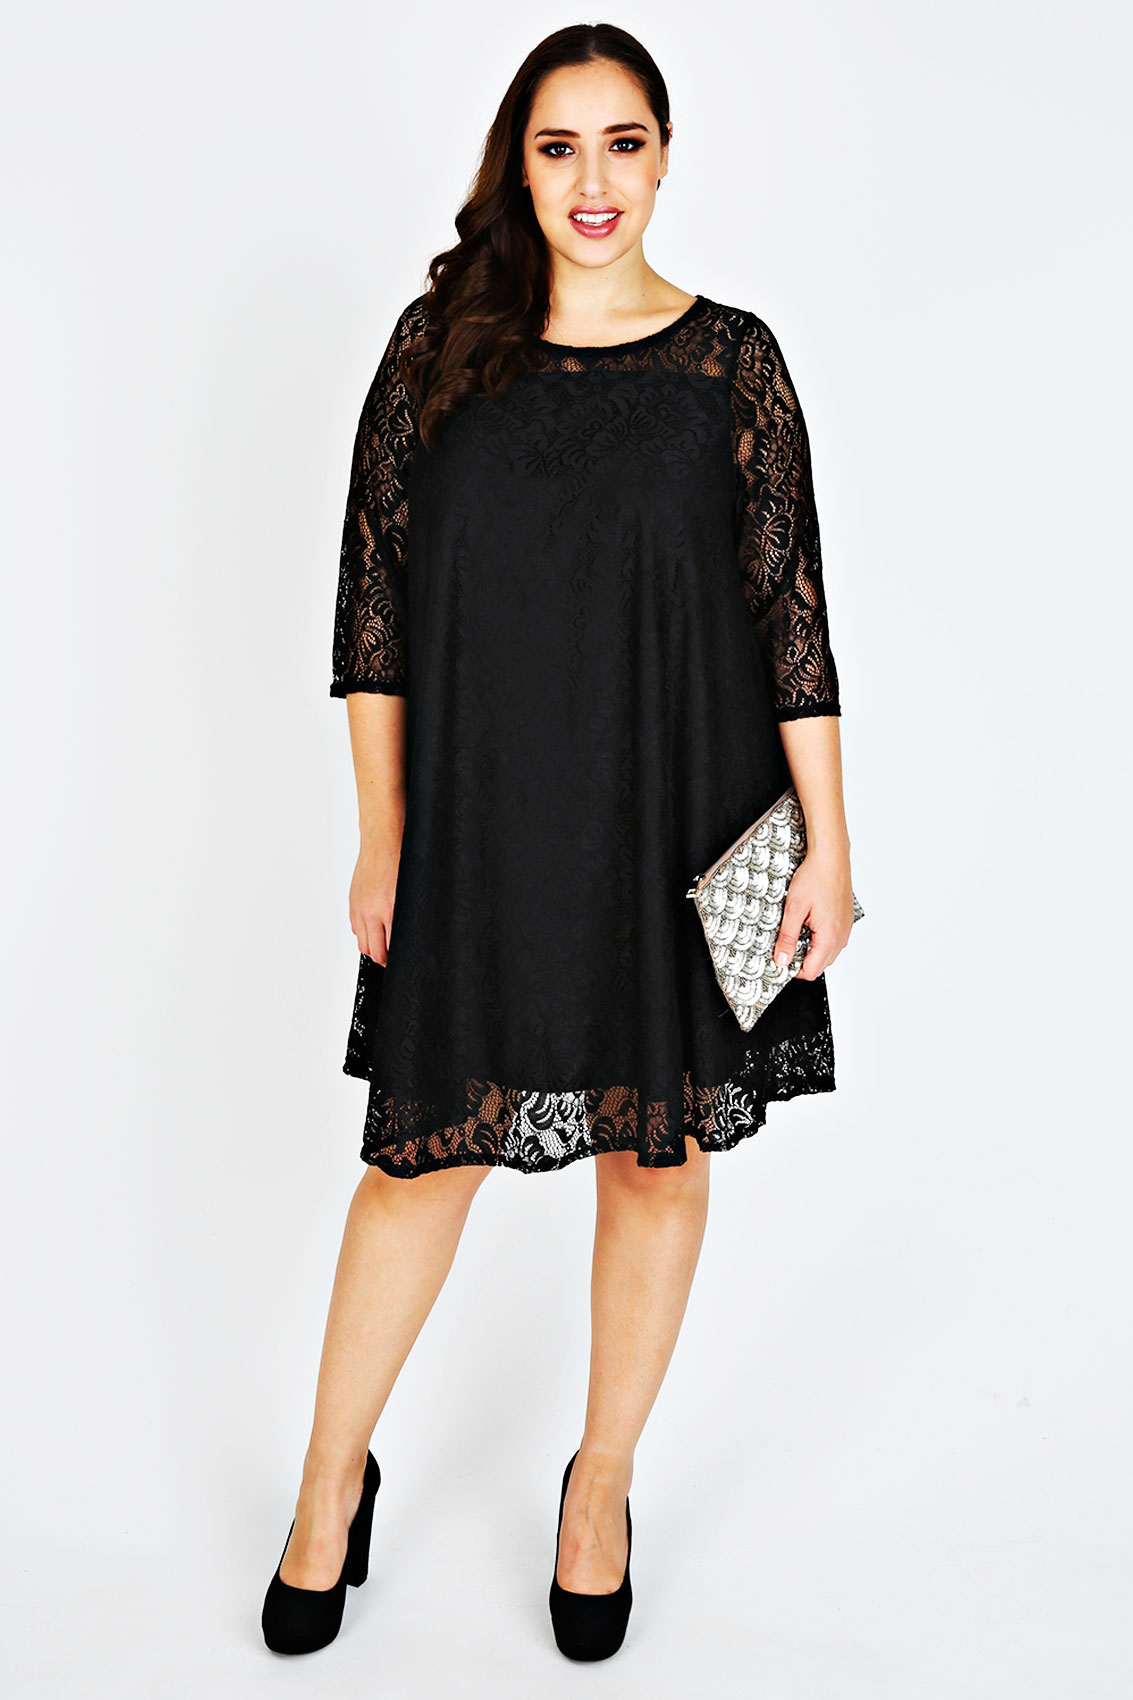 Black Lace Sleeved Swing Dress Plus Size 14 to 36